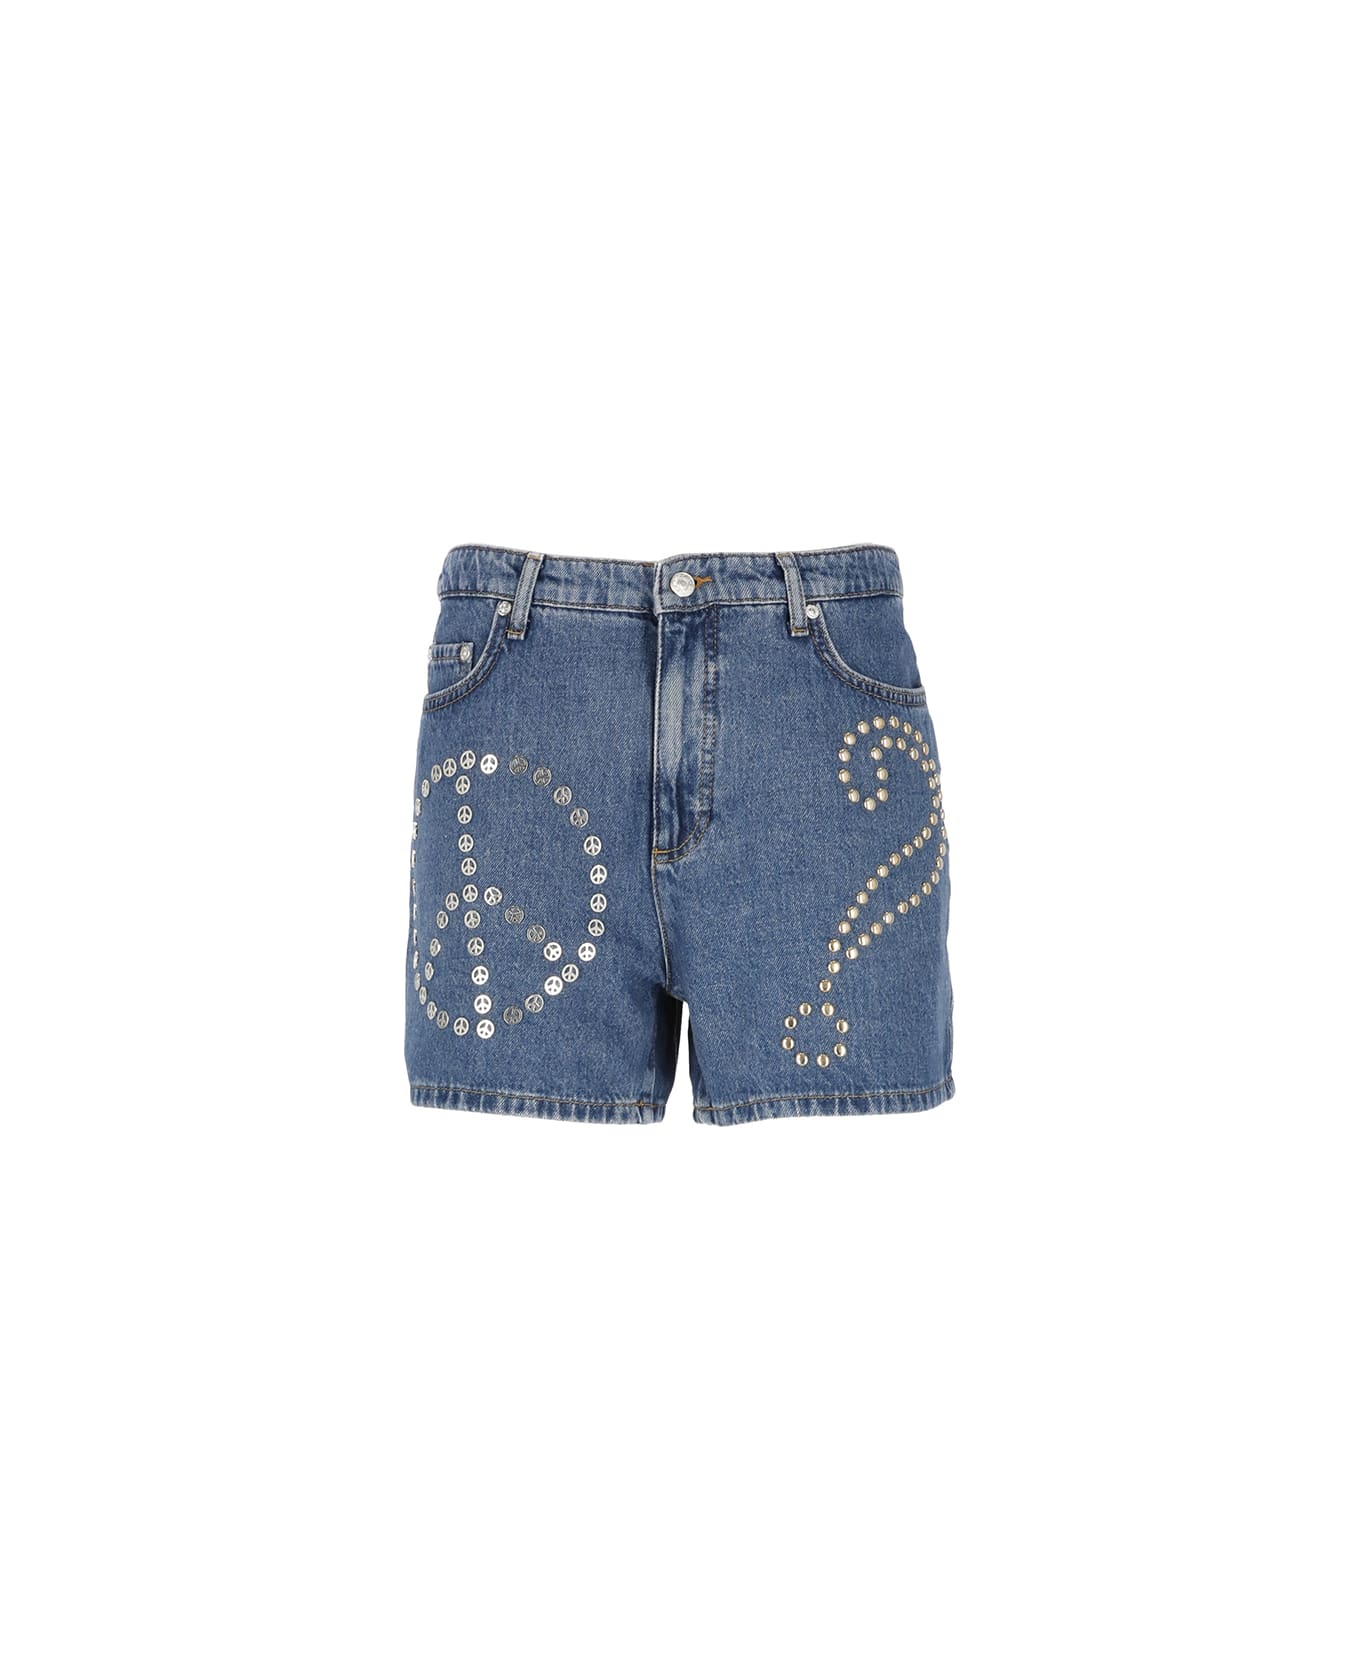 M05CH1N0 Jeans Shorts With Stud - Blue ショートパンツ